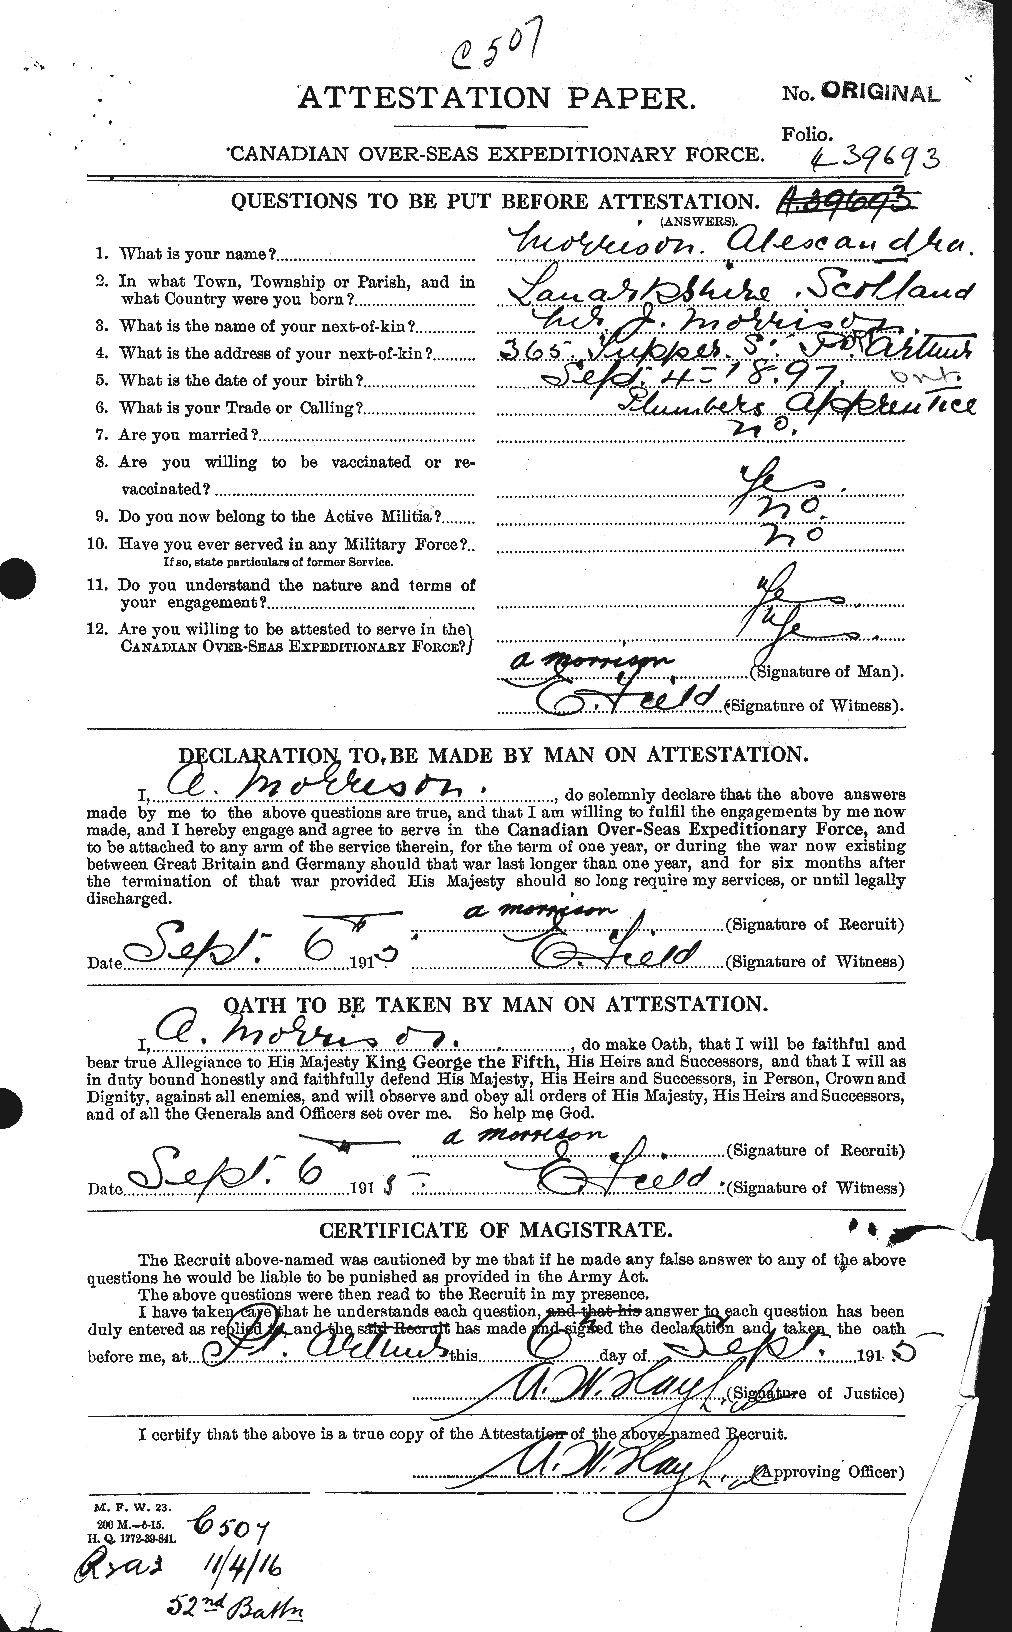 Personnel Records of the First World War - CEF 511008a